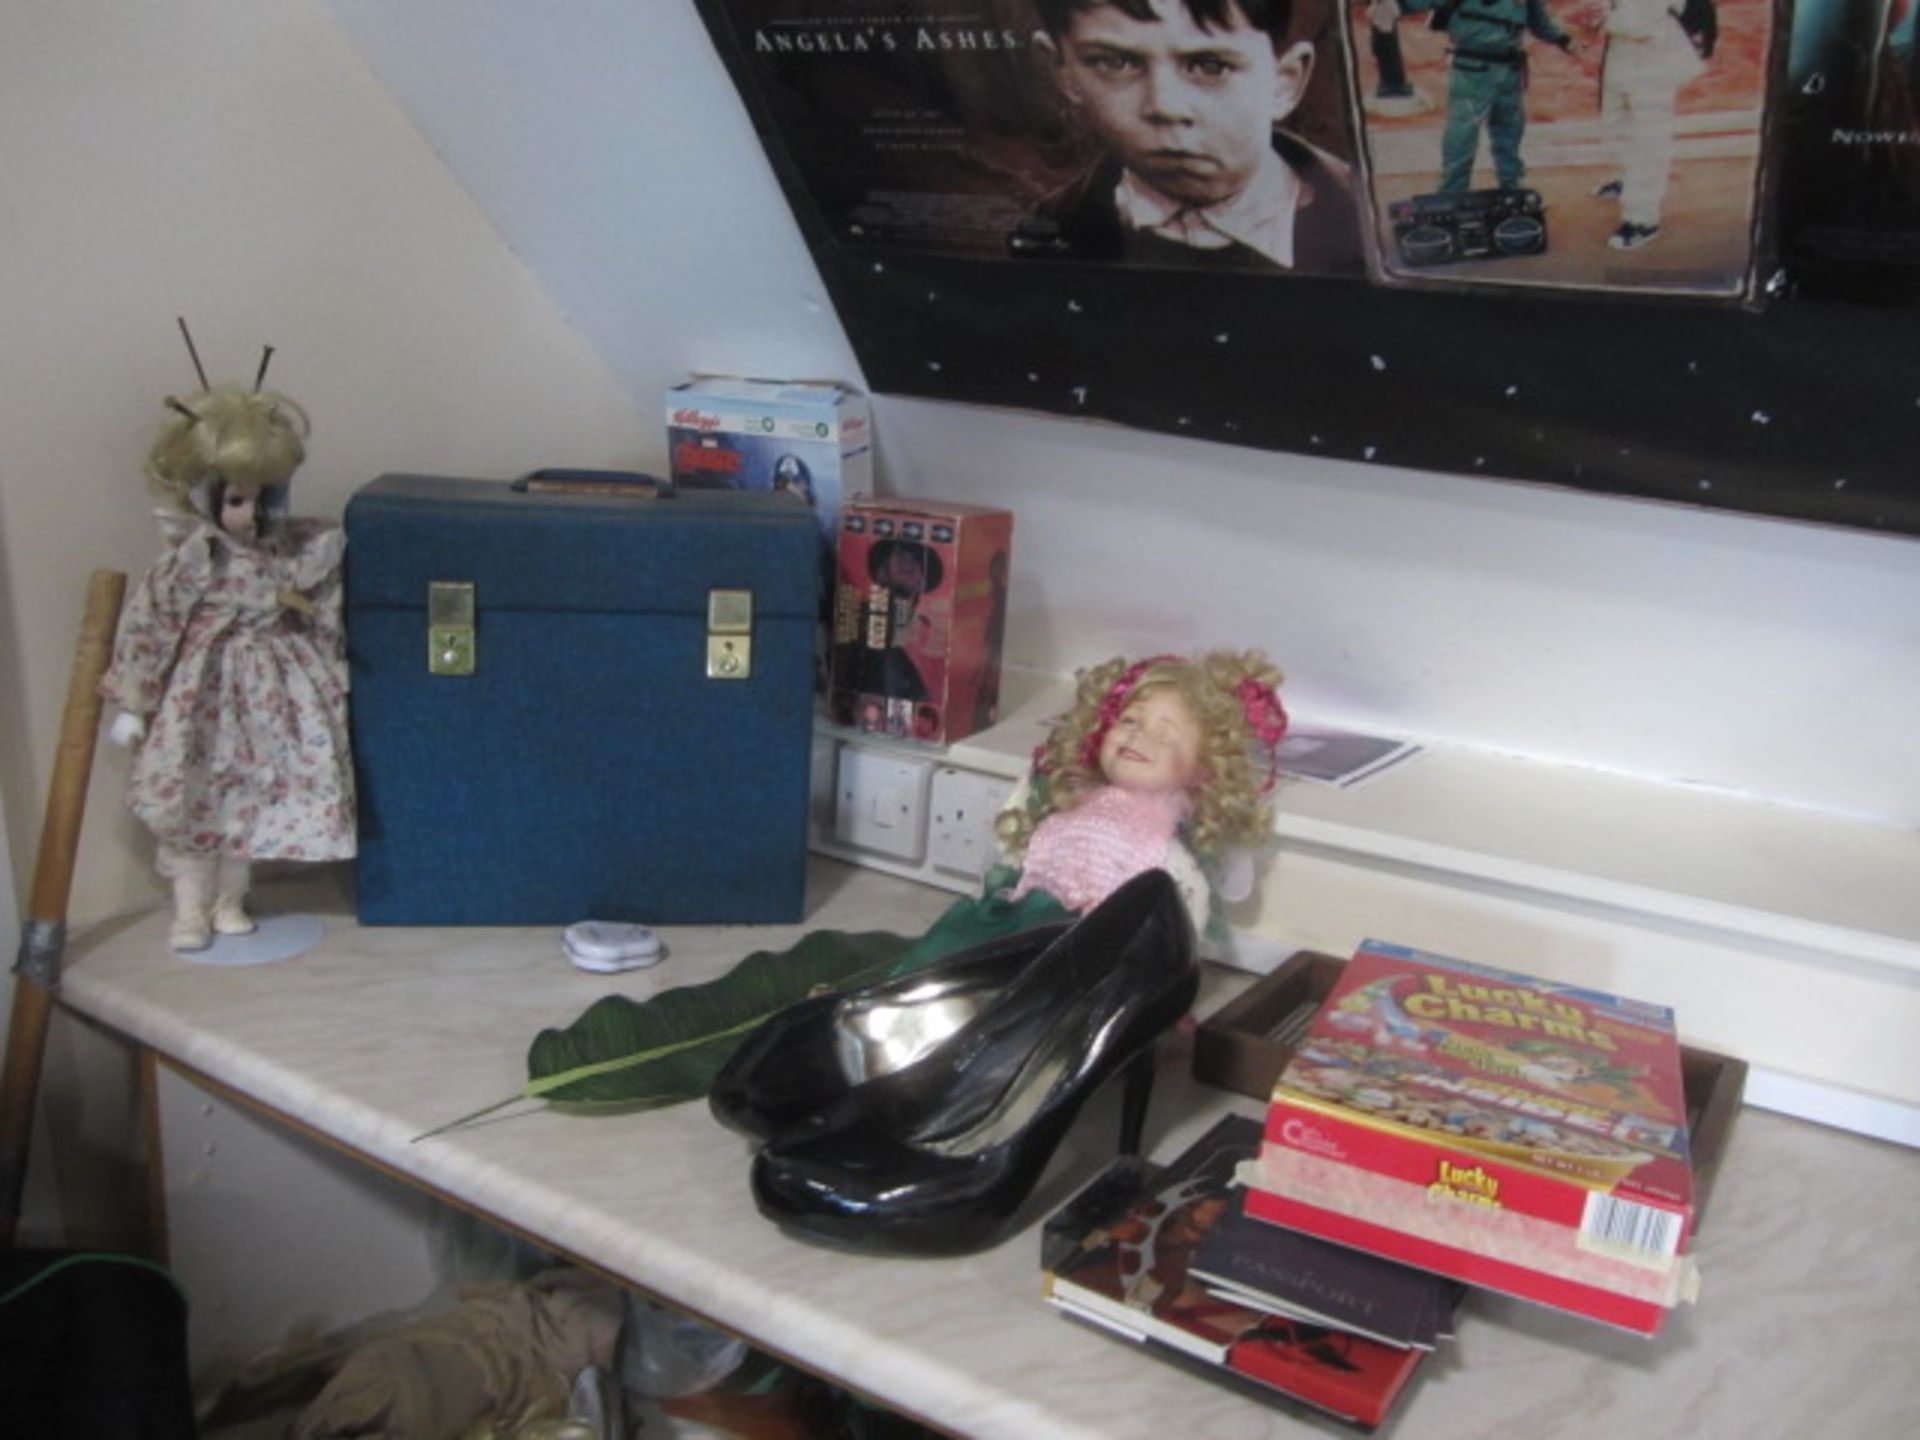 Remaining loose contents of room including dressing up costumes, hair accessories, DVD's, books, - Image 3 of 11